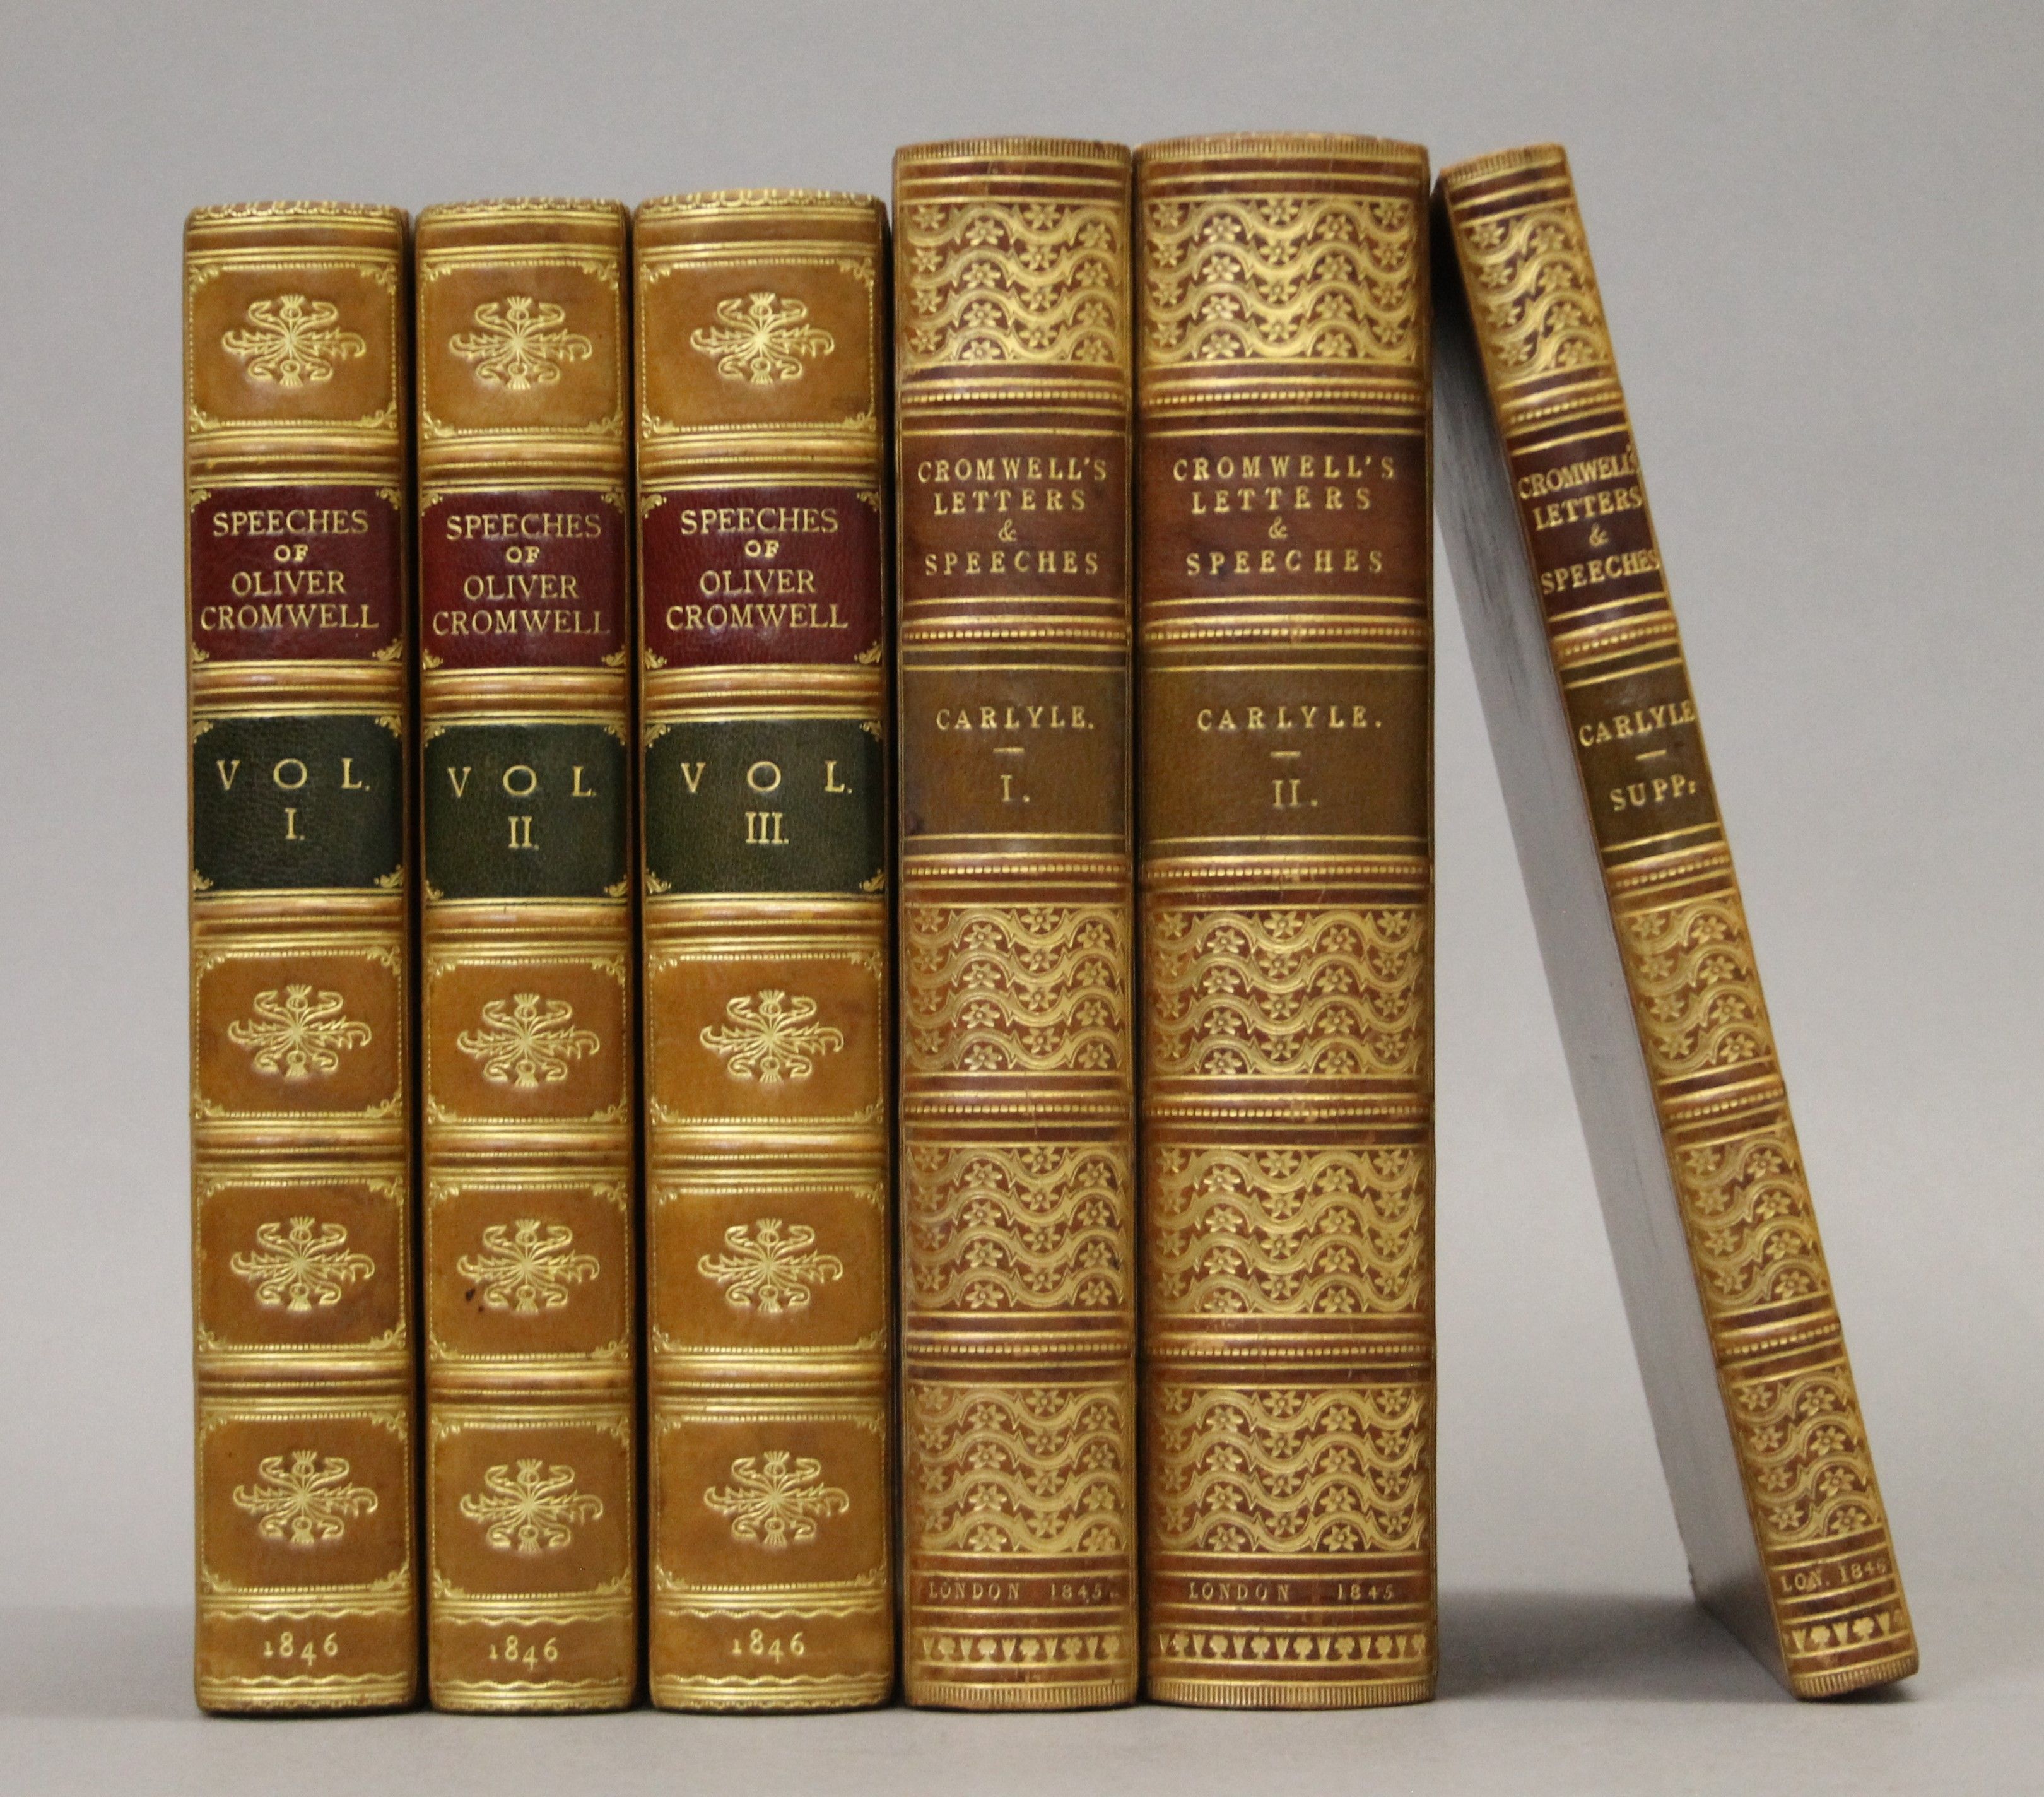 Carlyle (Thomas), Oliver Cromwell's Letters and Speeches, first edition, 3 vols,